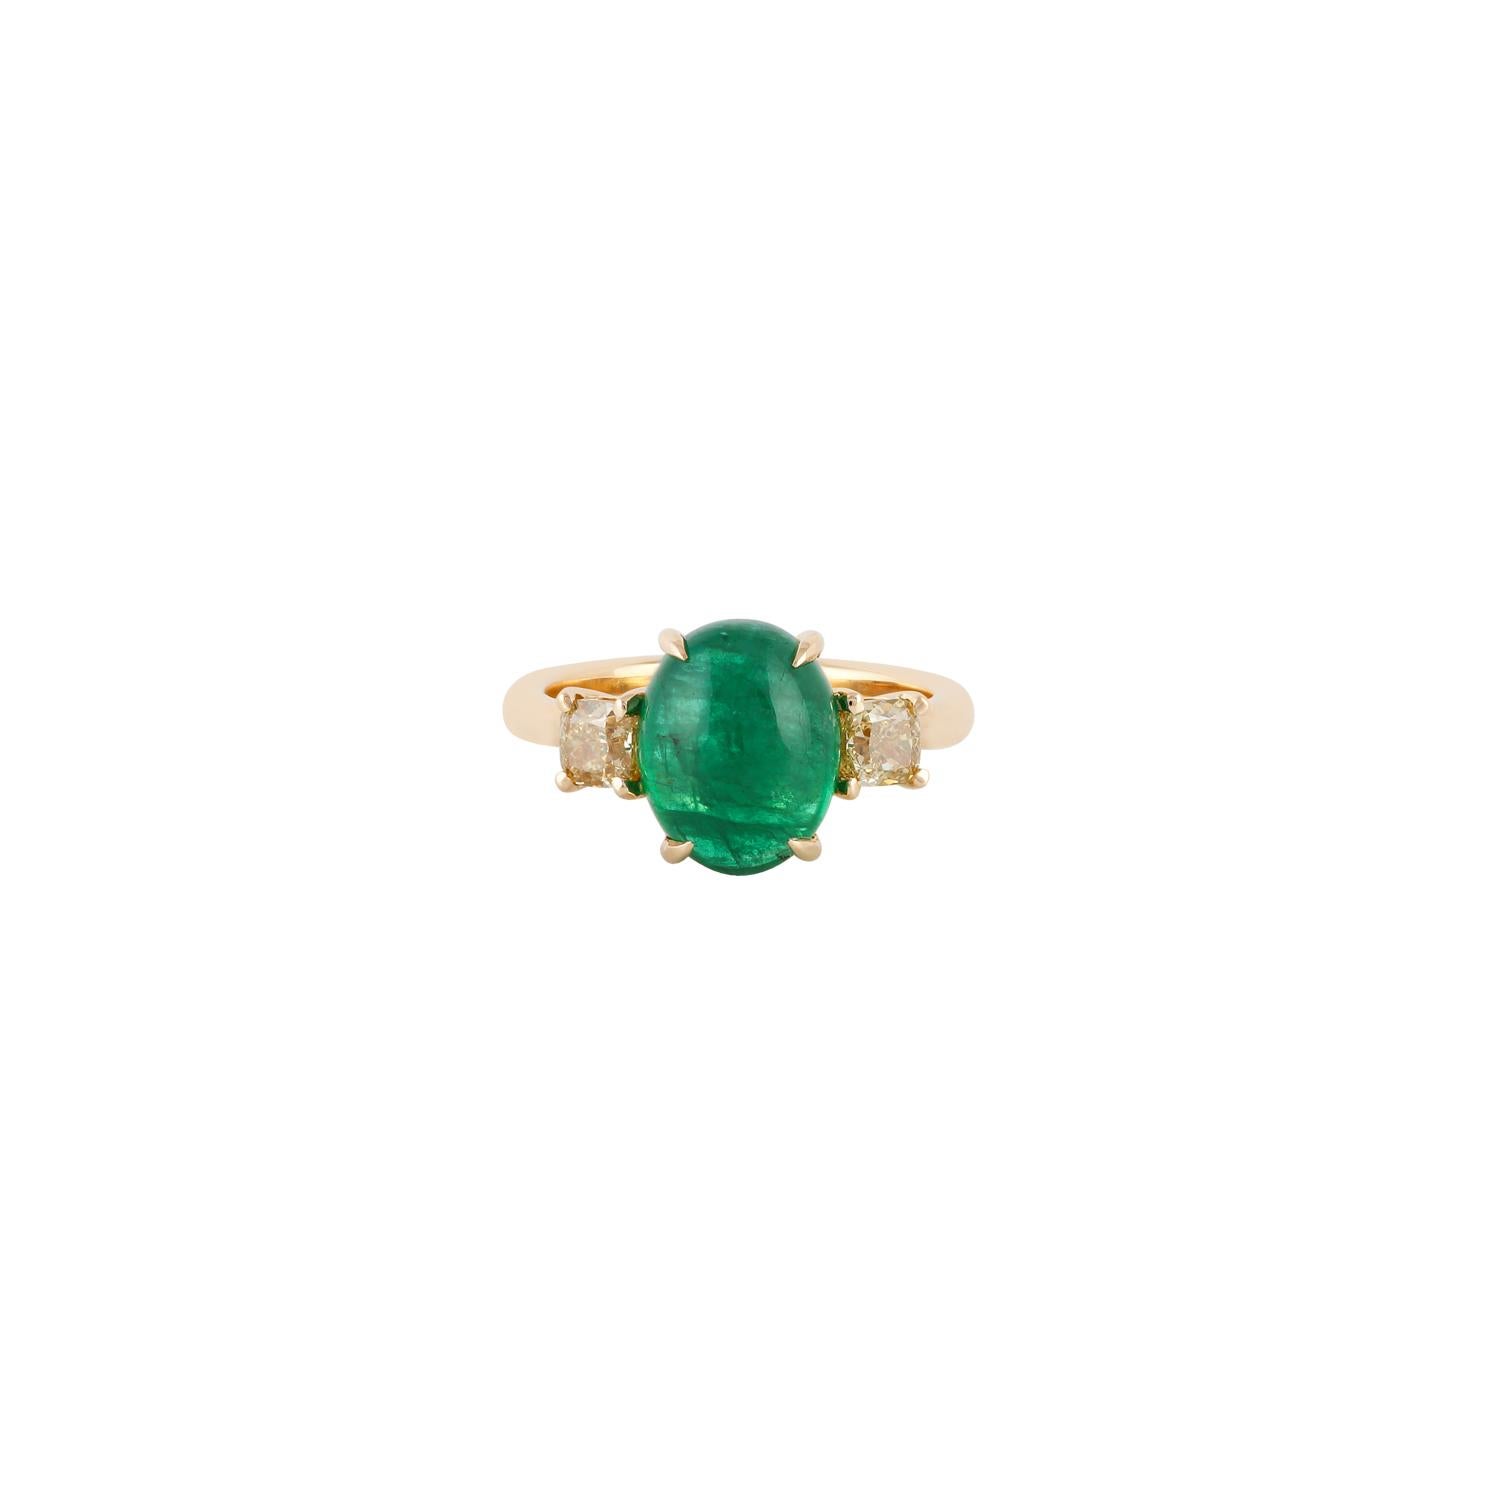 A one of a kind, cabochon Zambian Emerald weighing (4.17 carats) with fancy Diamond 
Fancy Diamond - 0.73 Carat 
Gold 18K Yellow Gold
 

The ring is currently sized at US 6.5
Ring Can be Resized And Ring come Along With Prestation Box.

Please feel